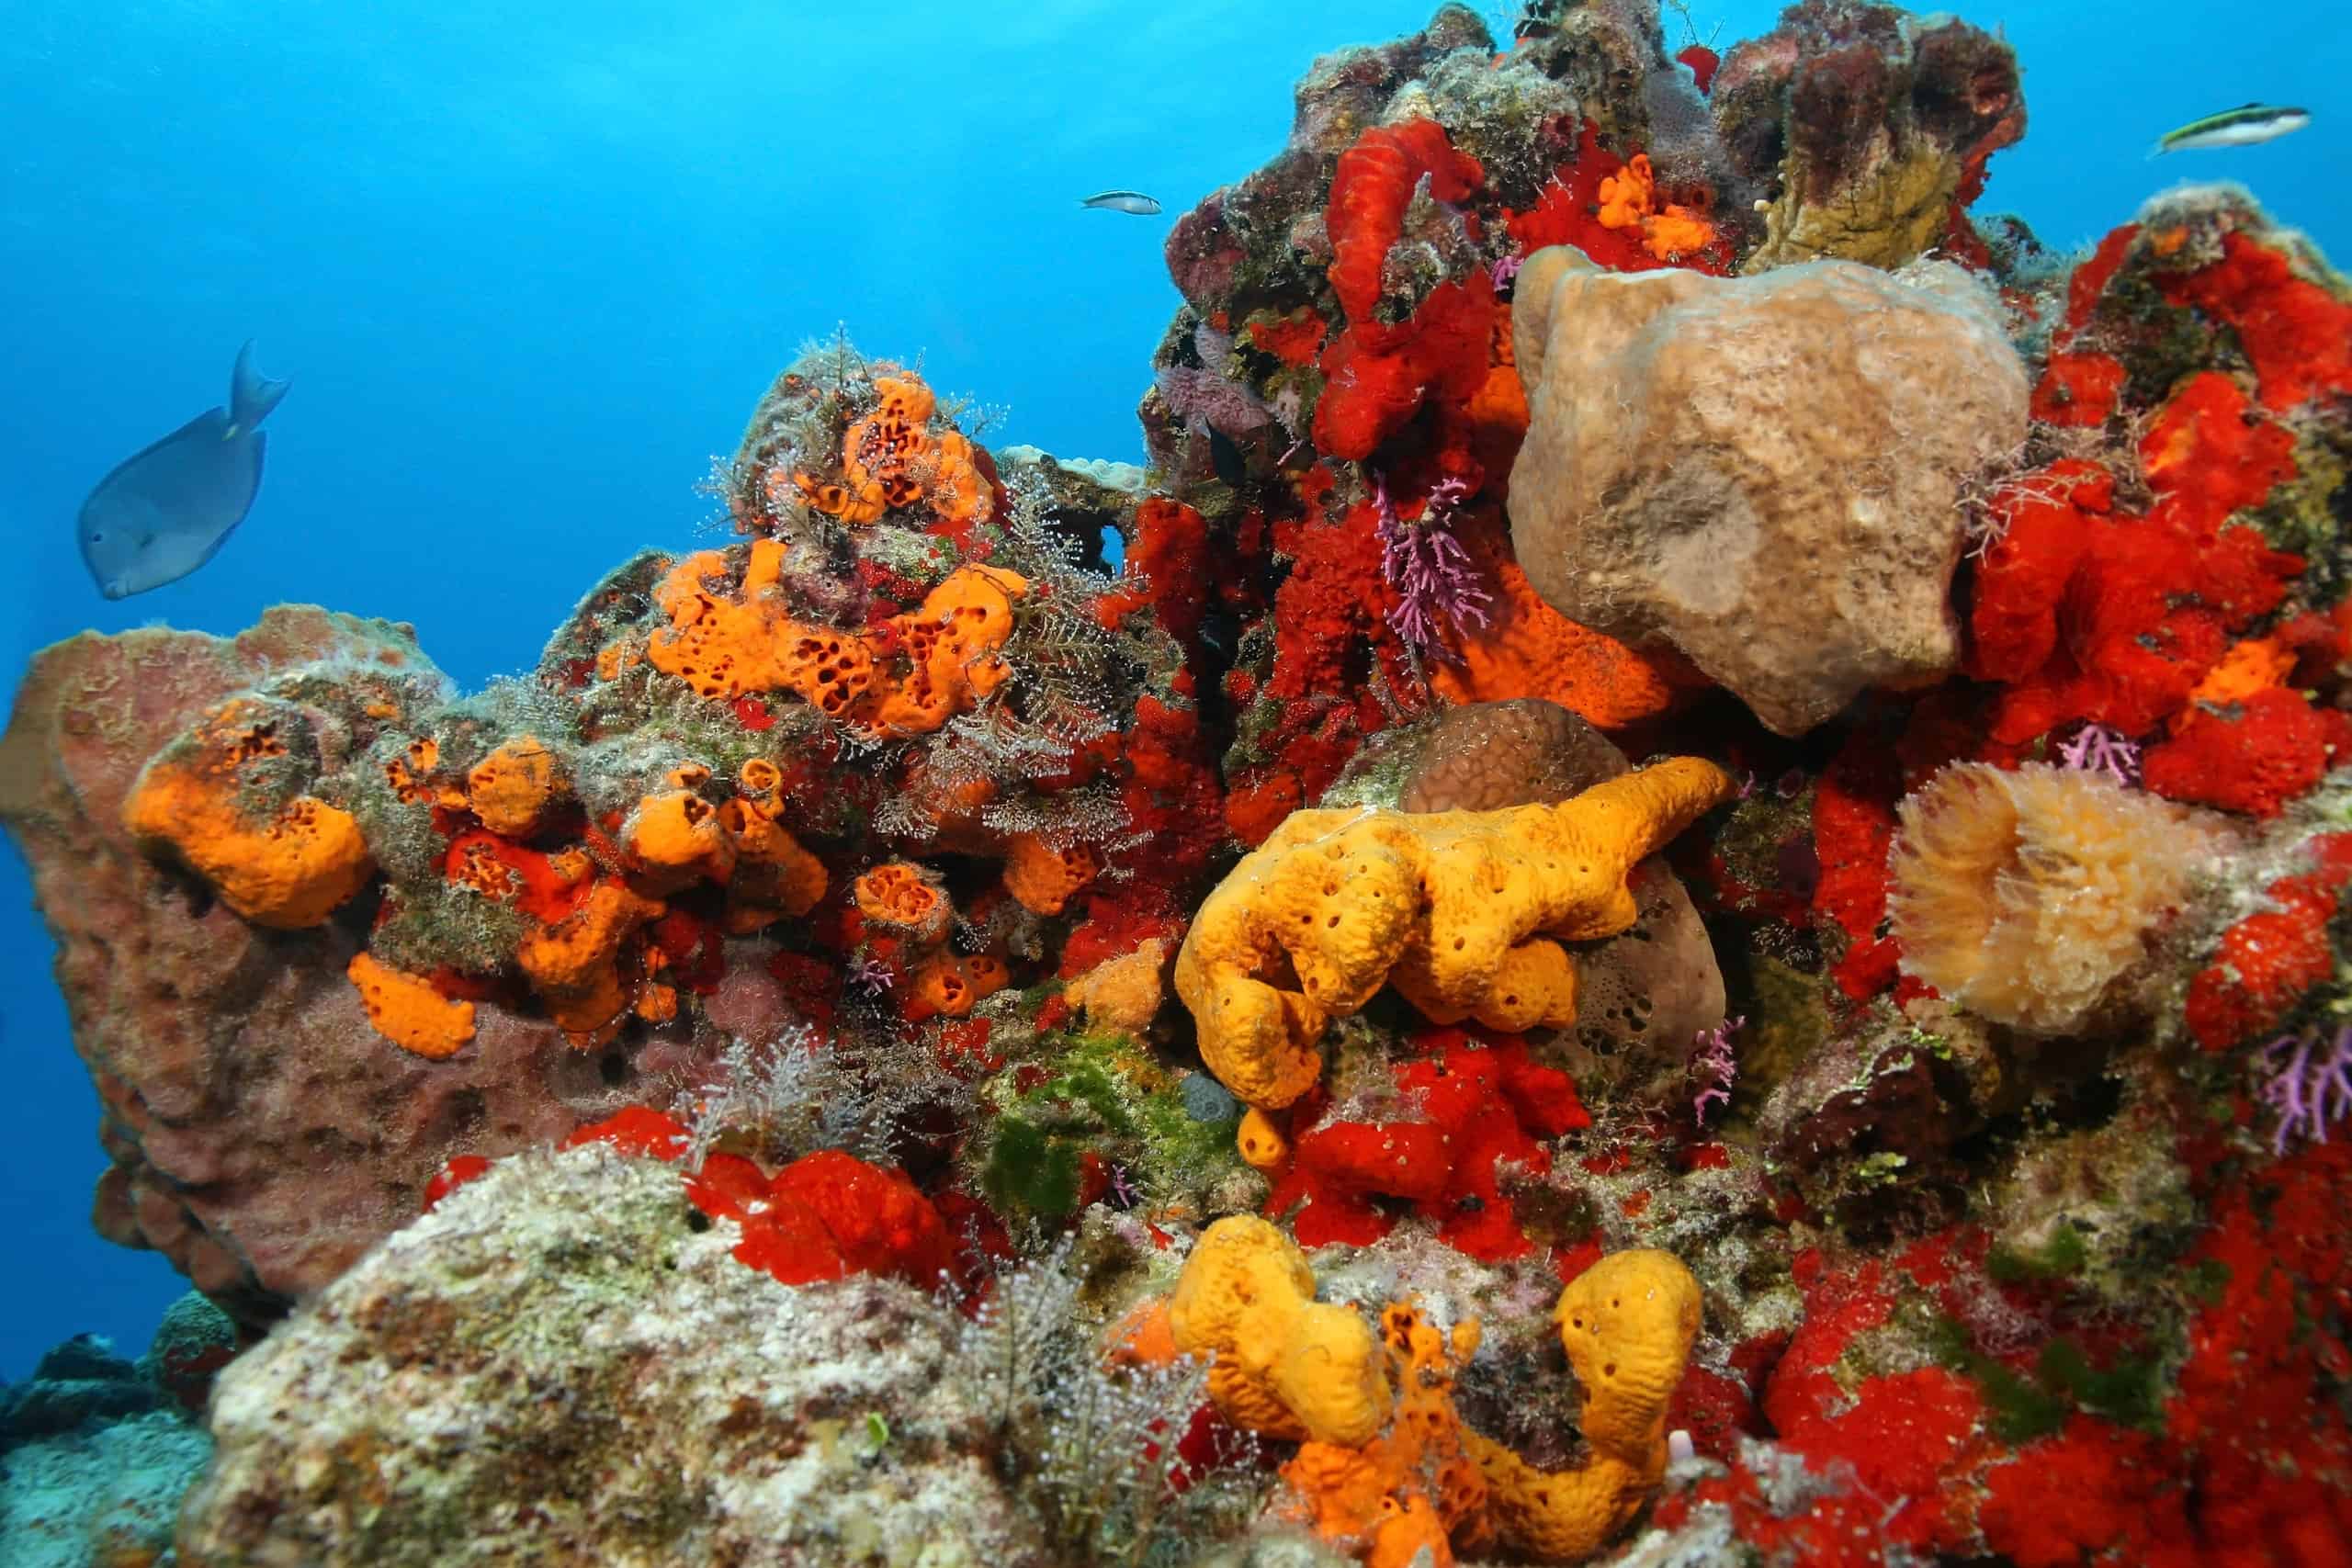 This colorful coral reef is in the Gulf of Mexico near Cozumel.